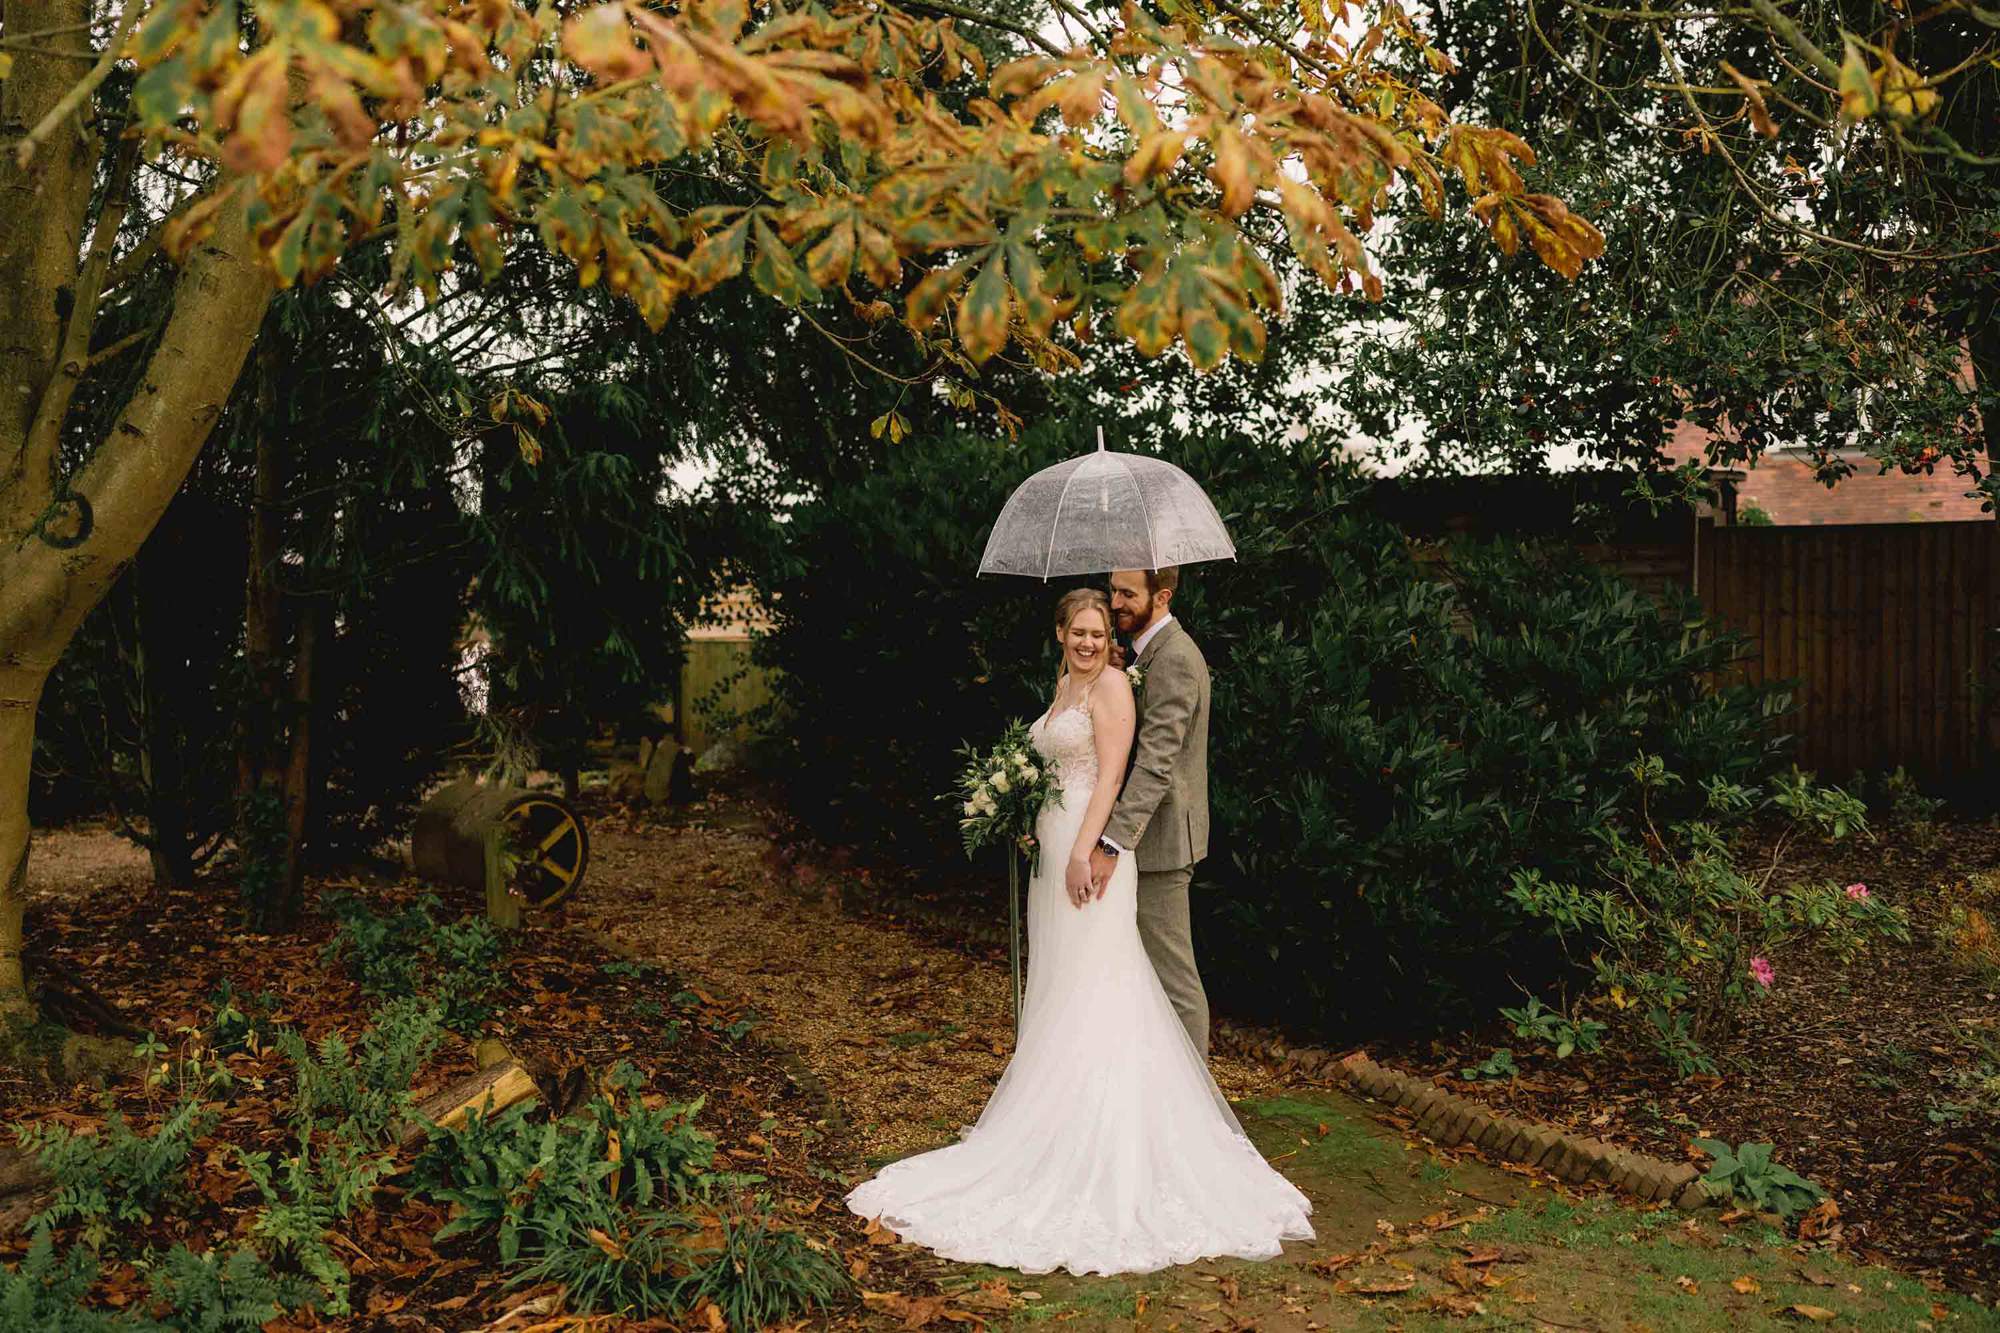 Bride and groom have a cuddle under an umbrella at The Farmhouse at Redcoats in Hitchin.